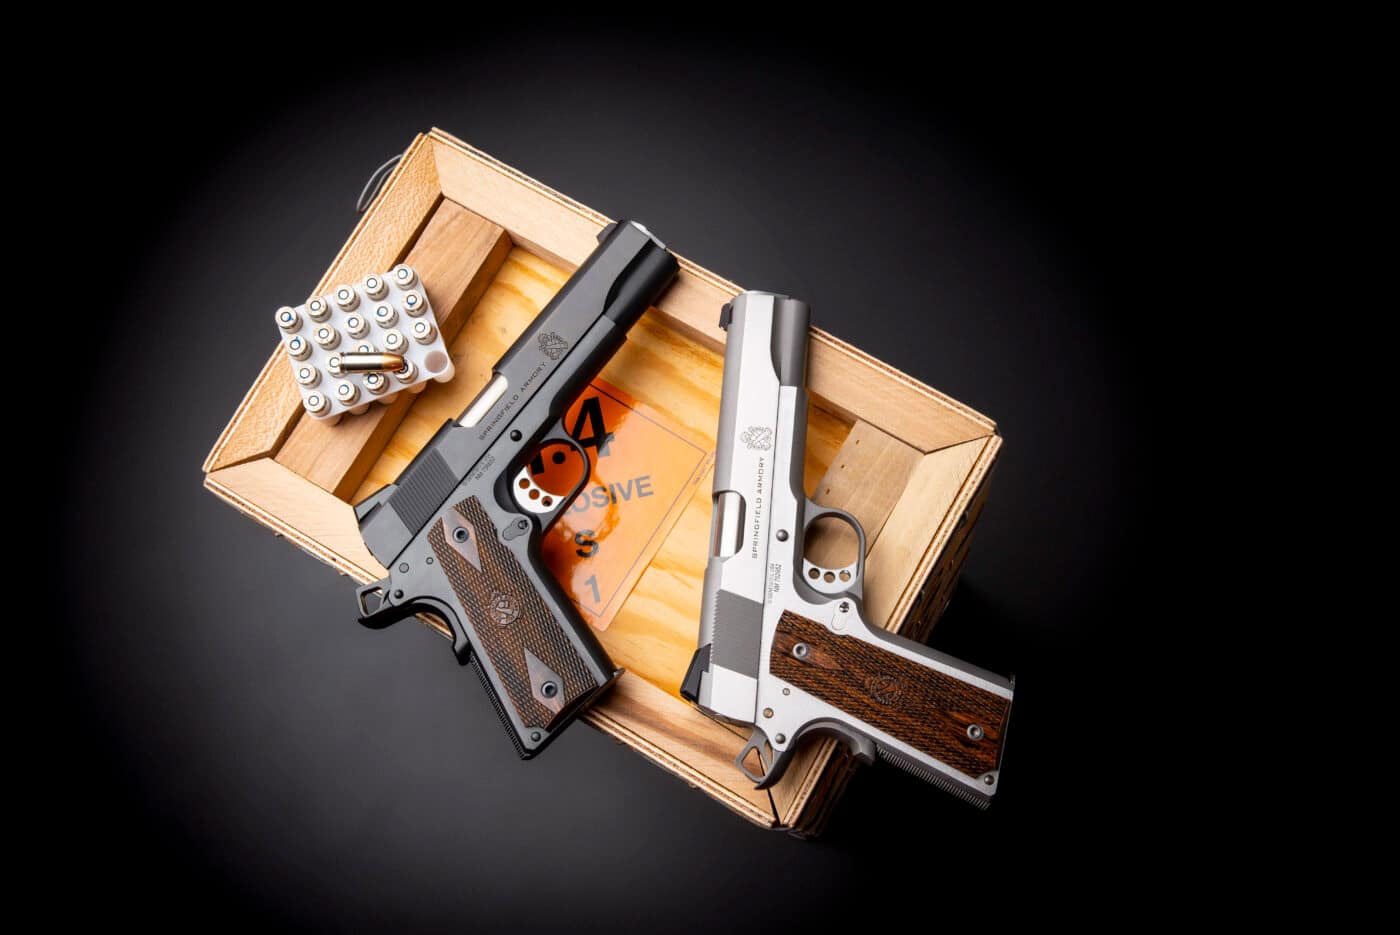 Springfield Armory 9mm Garrison 1911 pistols in blued and stainless finishes